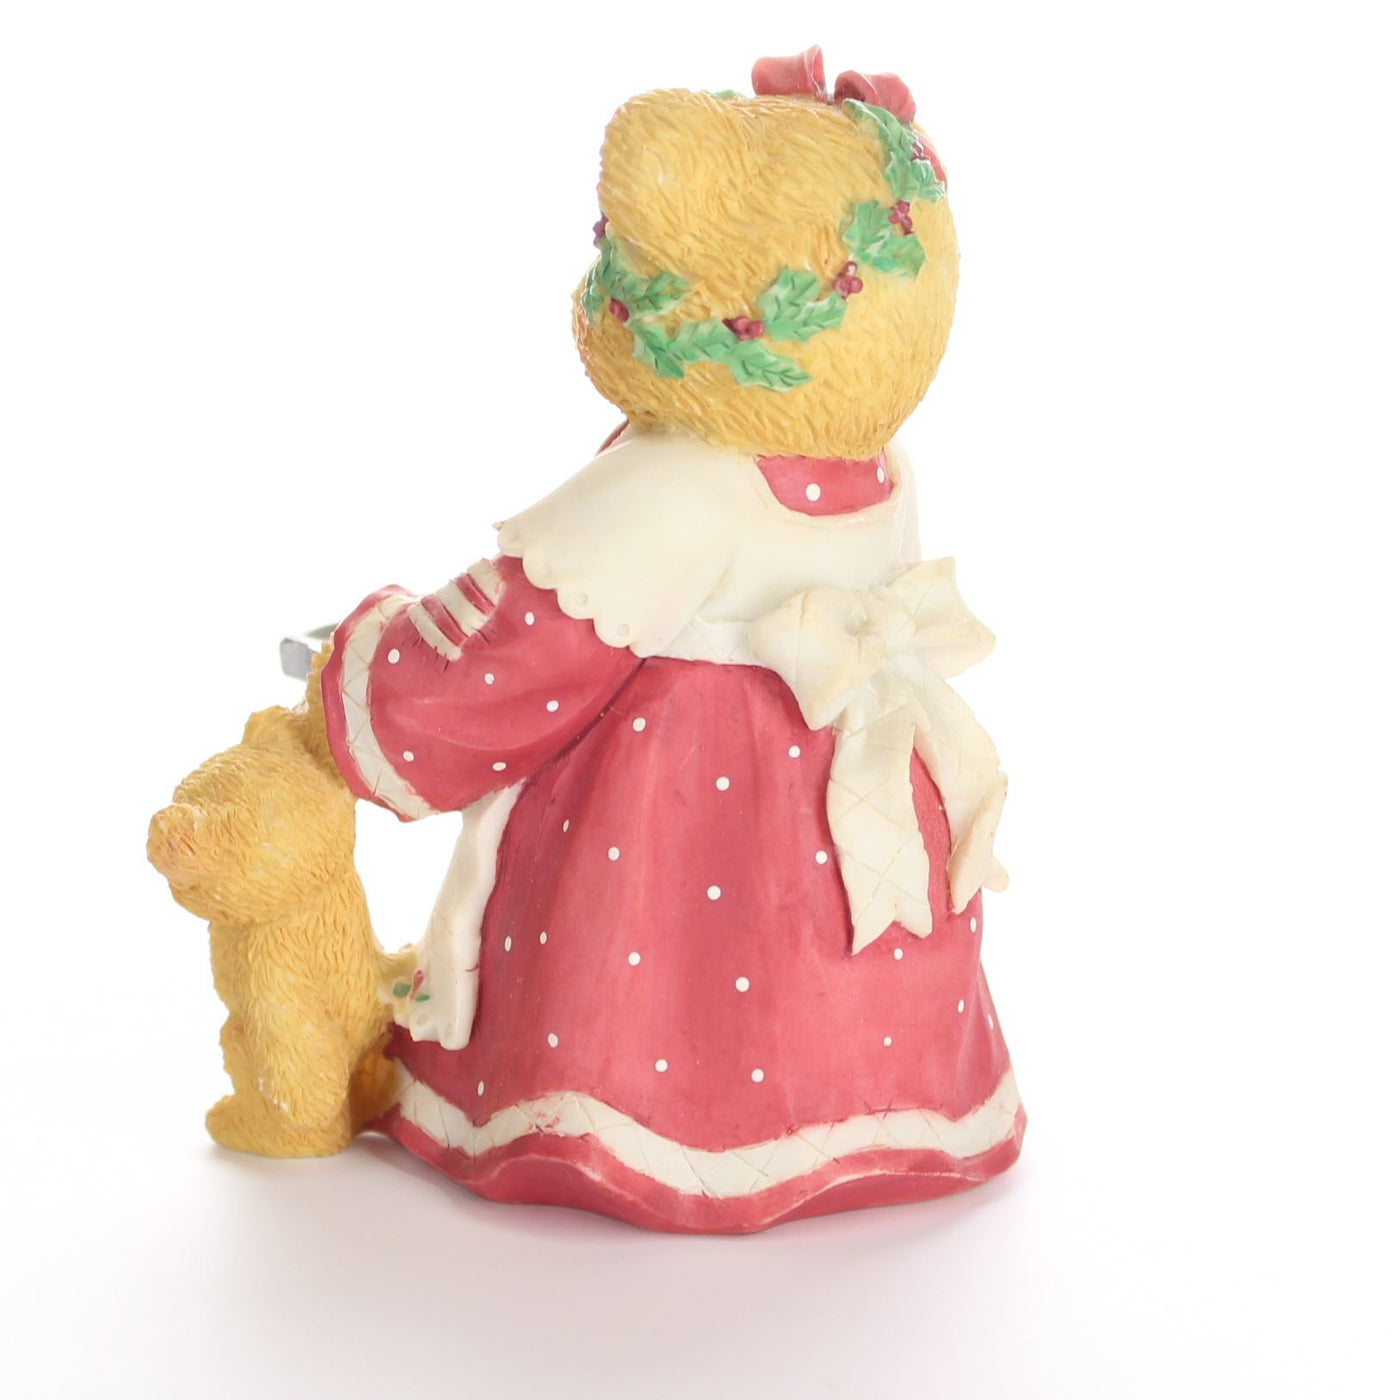 Cherished Teddies Vintage Christmas Figurine Here's Some Cheer To Last The Year